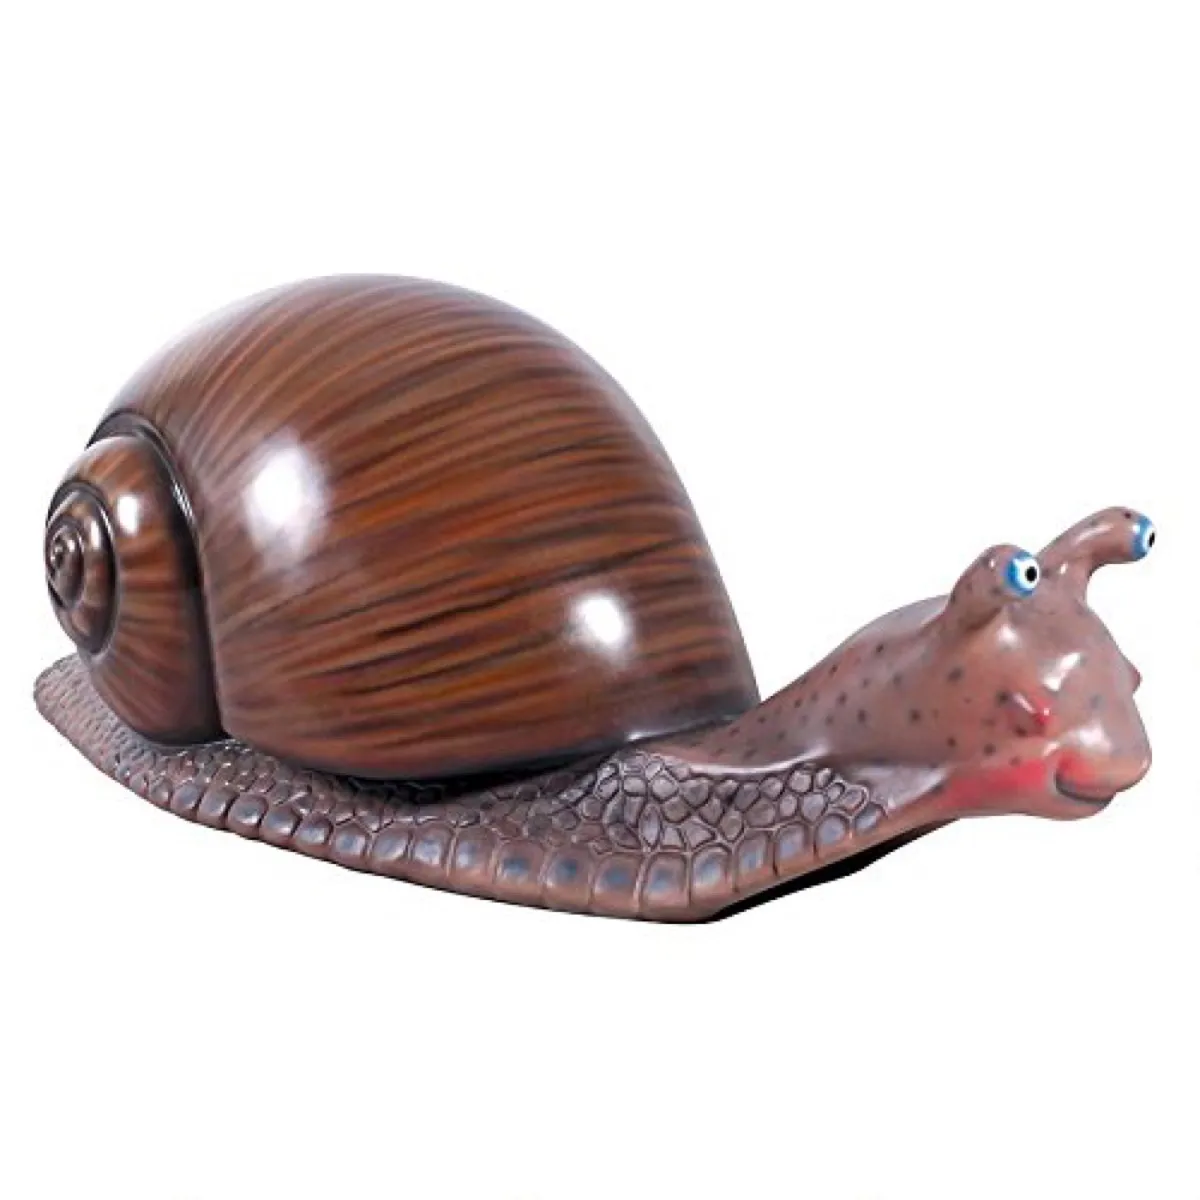 Snail Statue {Ugly Lawn Decorations}